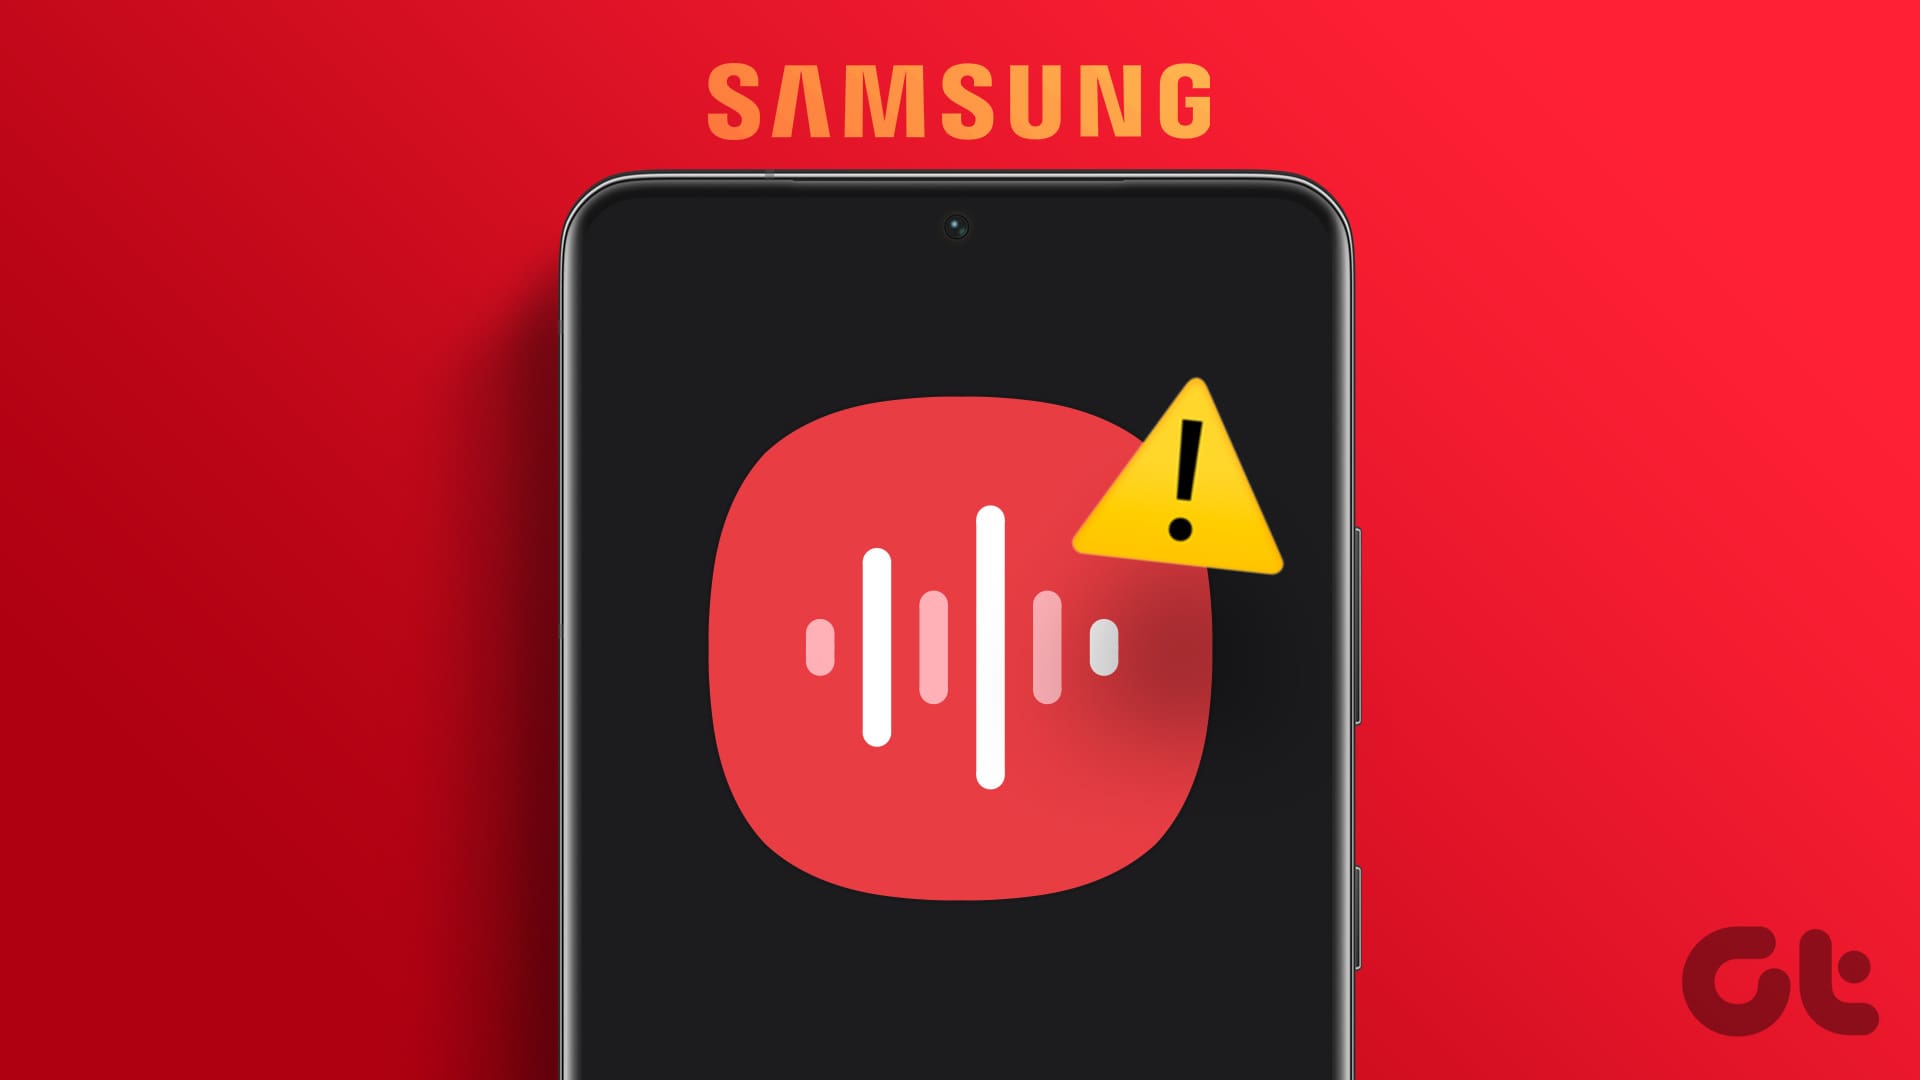 Top Fixes for Voice Recorder App Not Working on Samsung Galaxy Phones